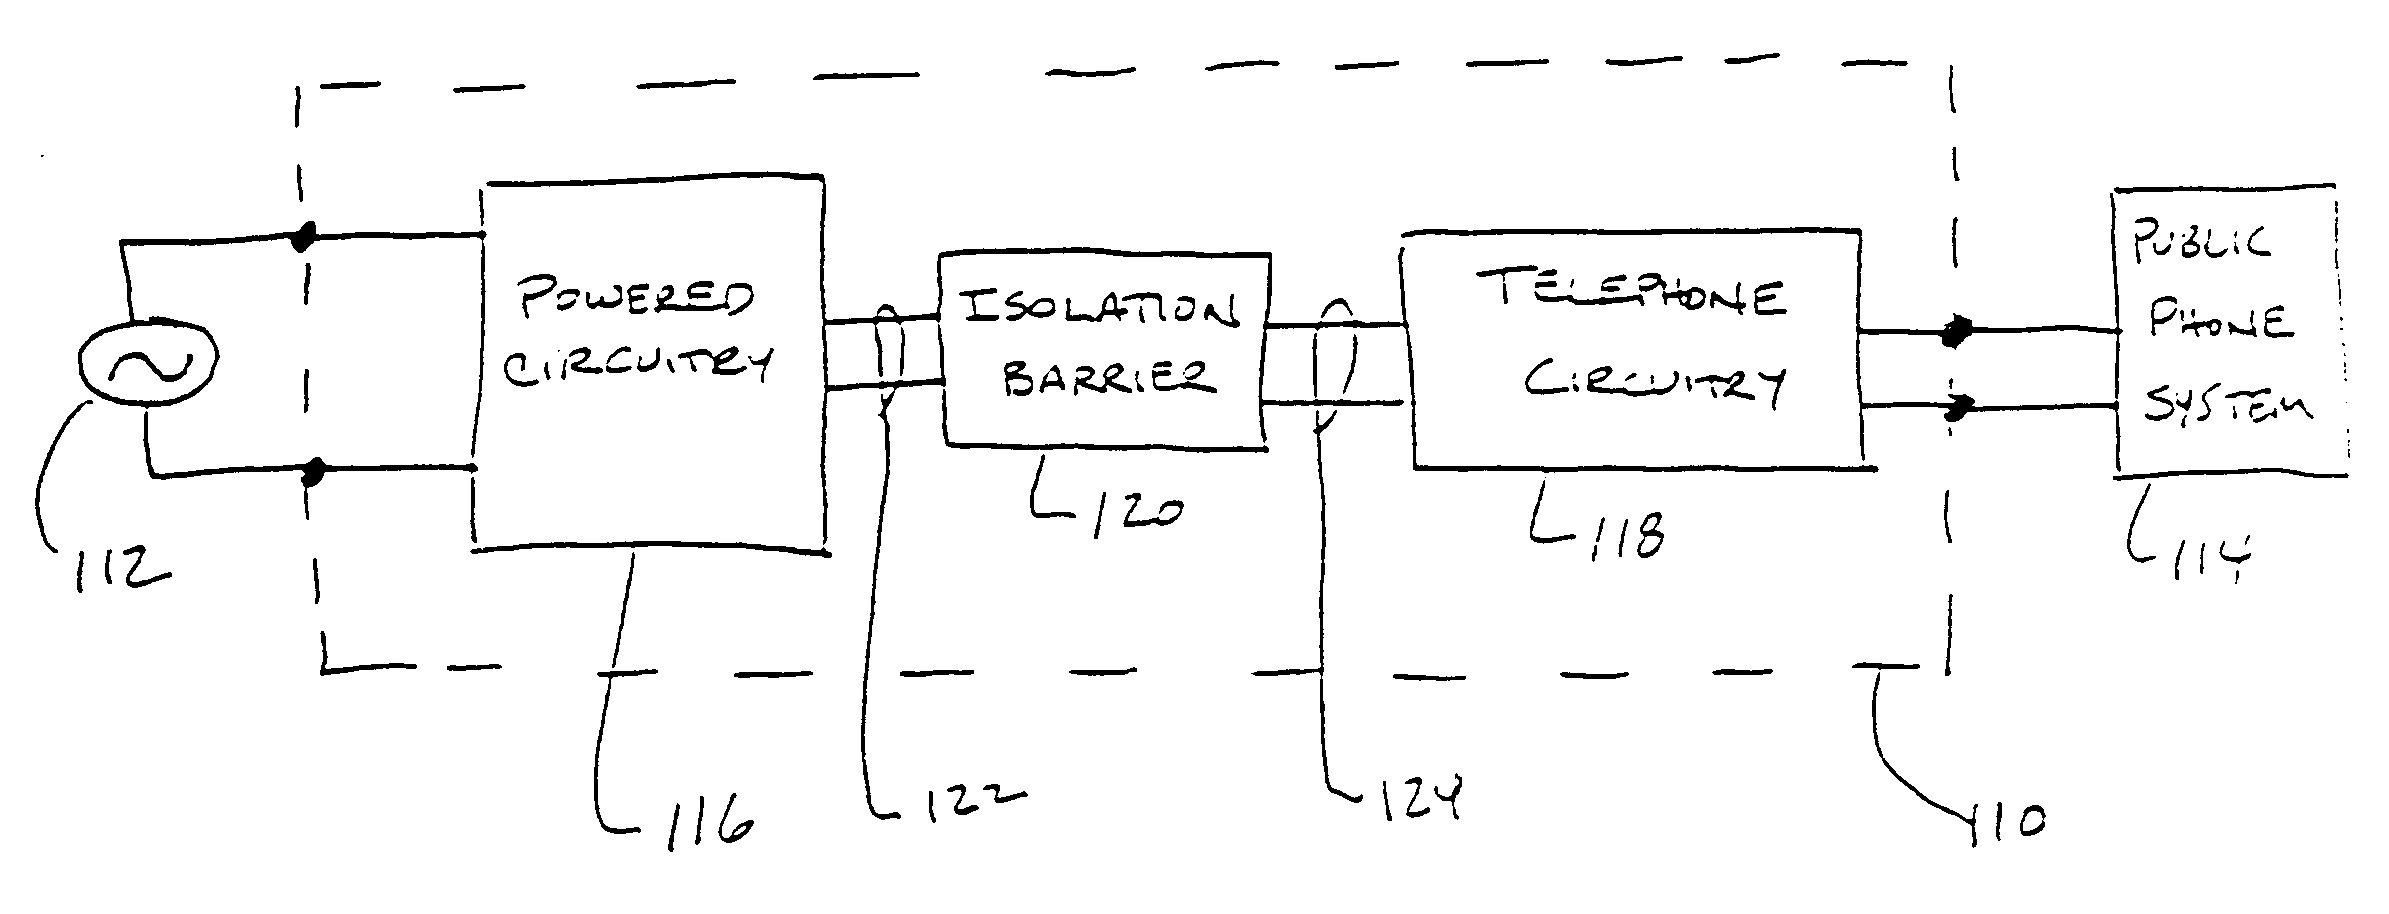 Digital isolation system with ADC offset calibration